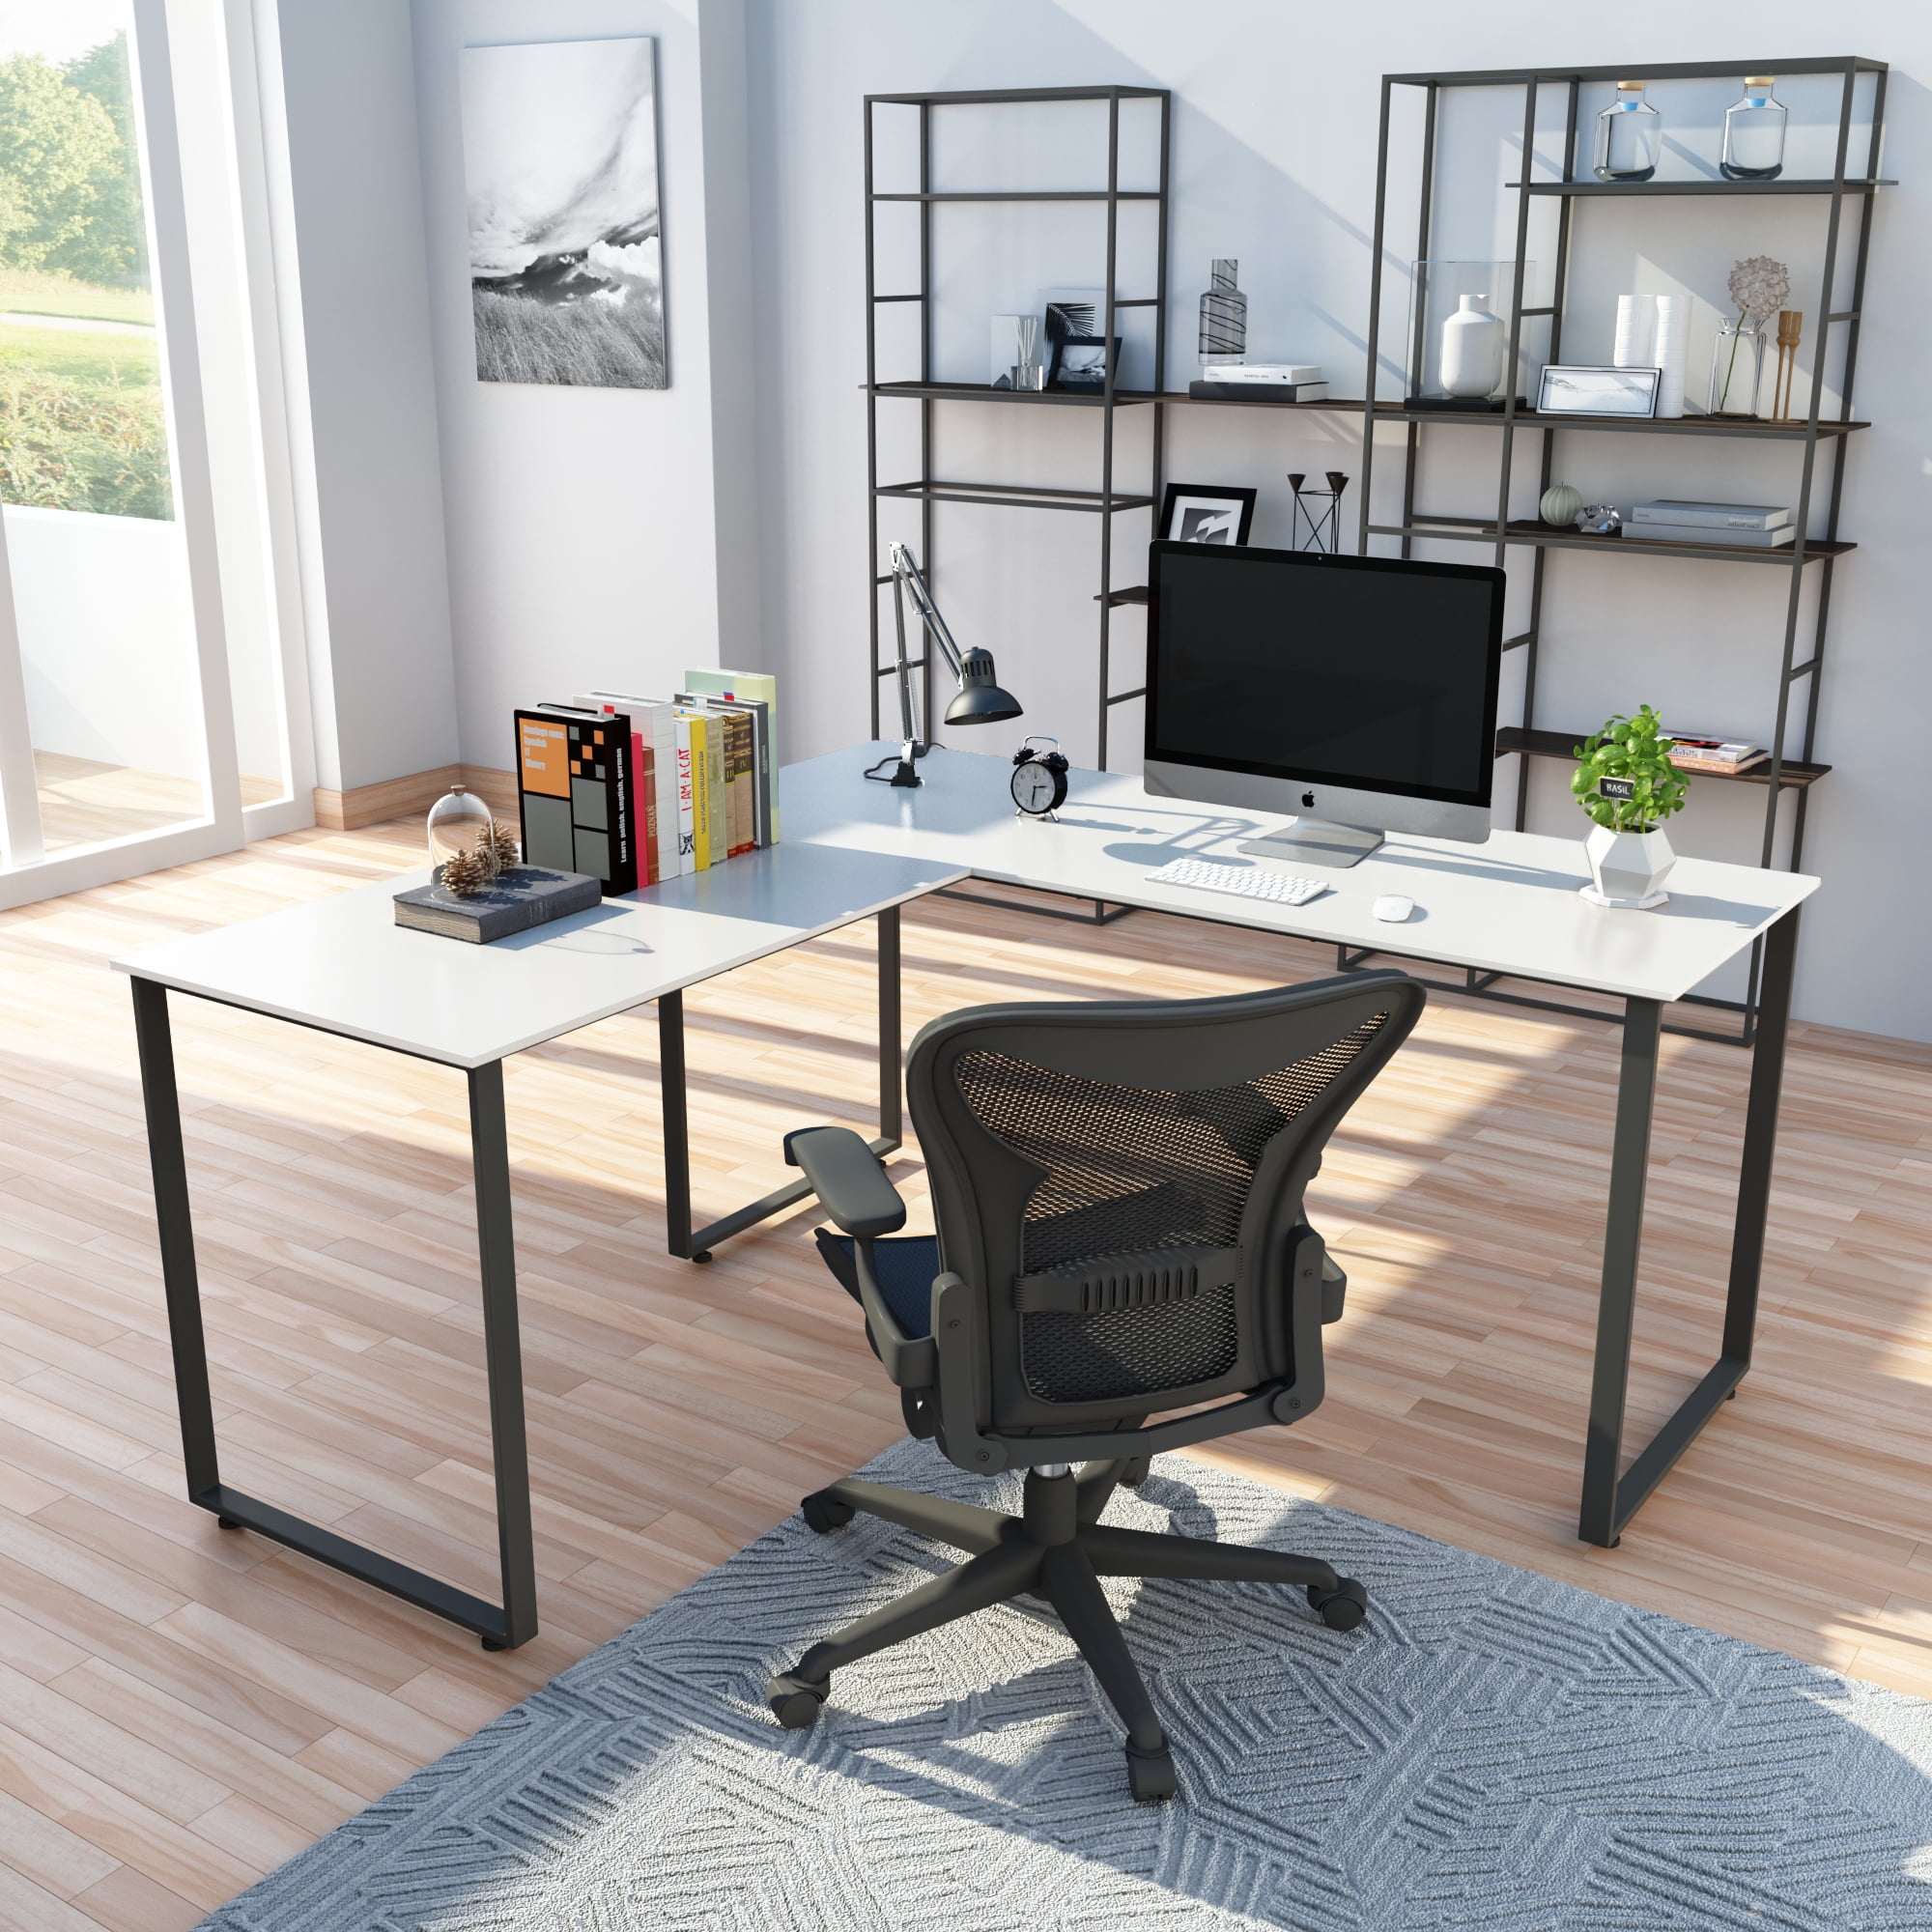 Beech Metal and Wood Corner Homy Casa Inc L Shaped Industrial Writing Workstation Table for Home Office Study Computer Desk